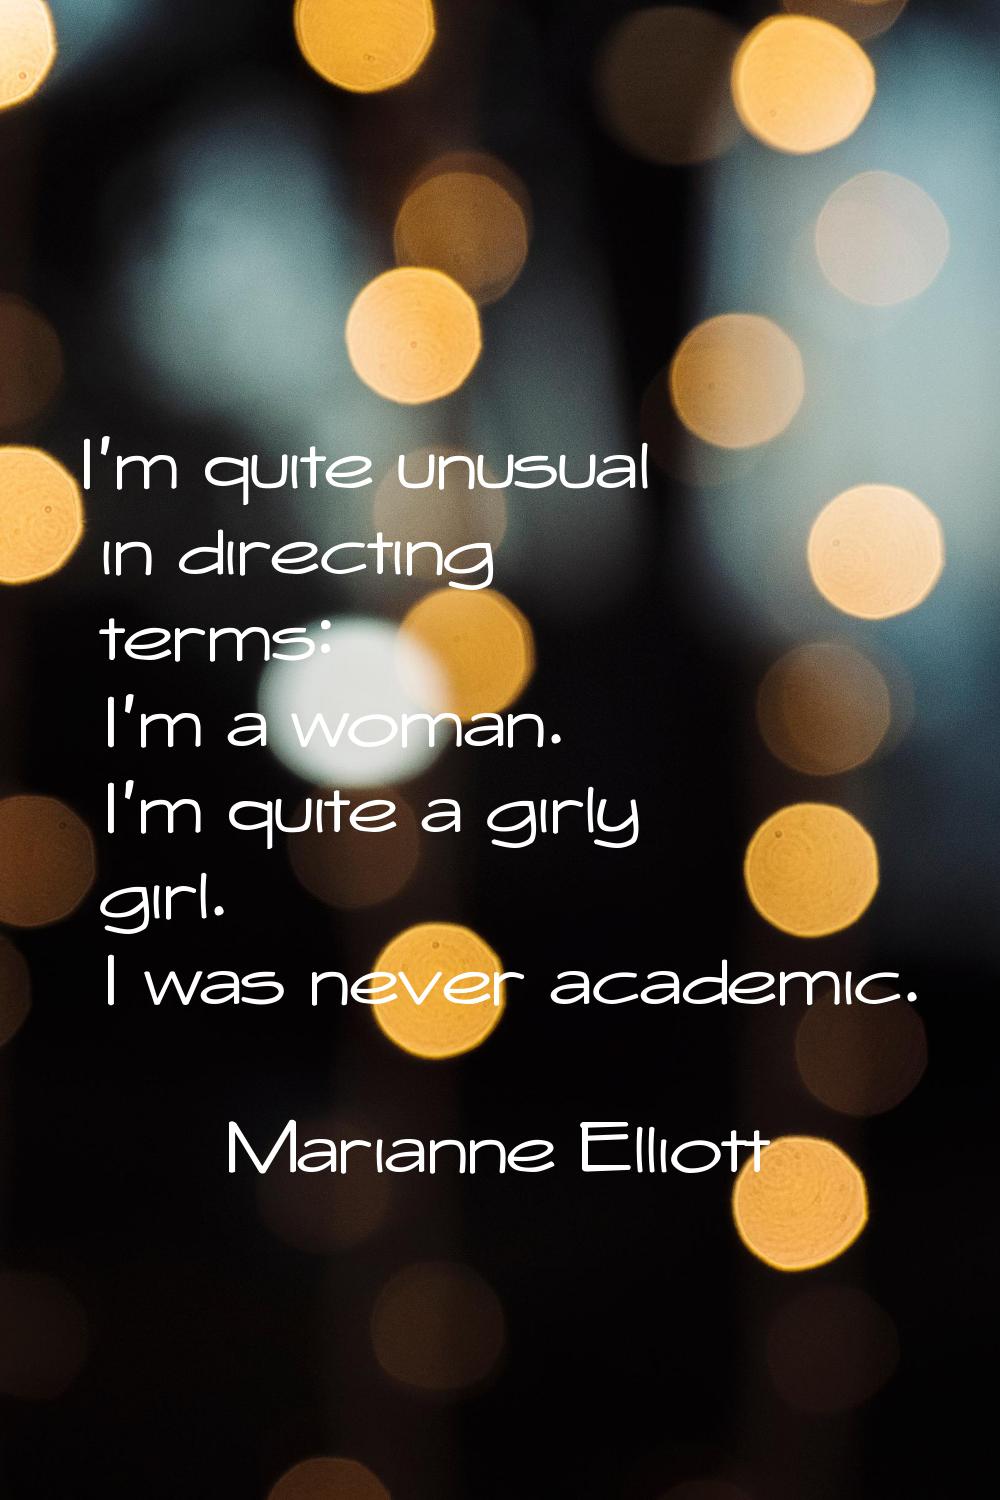 I'm quite unusual in directing terms: I'm a woman. I'm quite a girly girl. I was never academic.